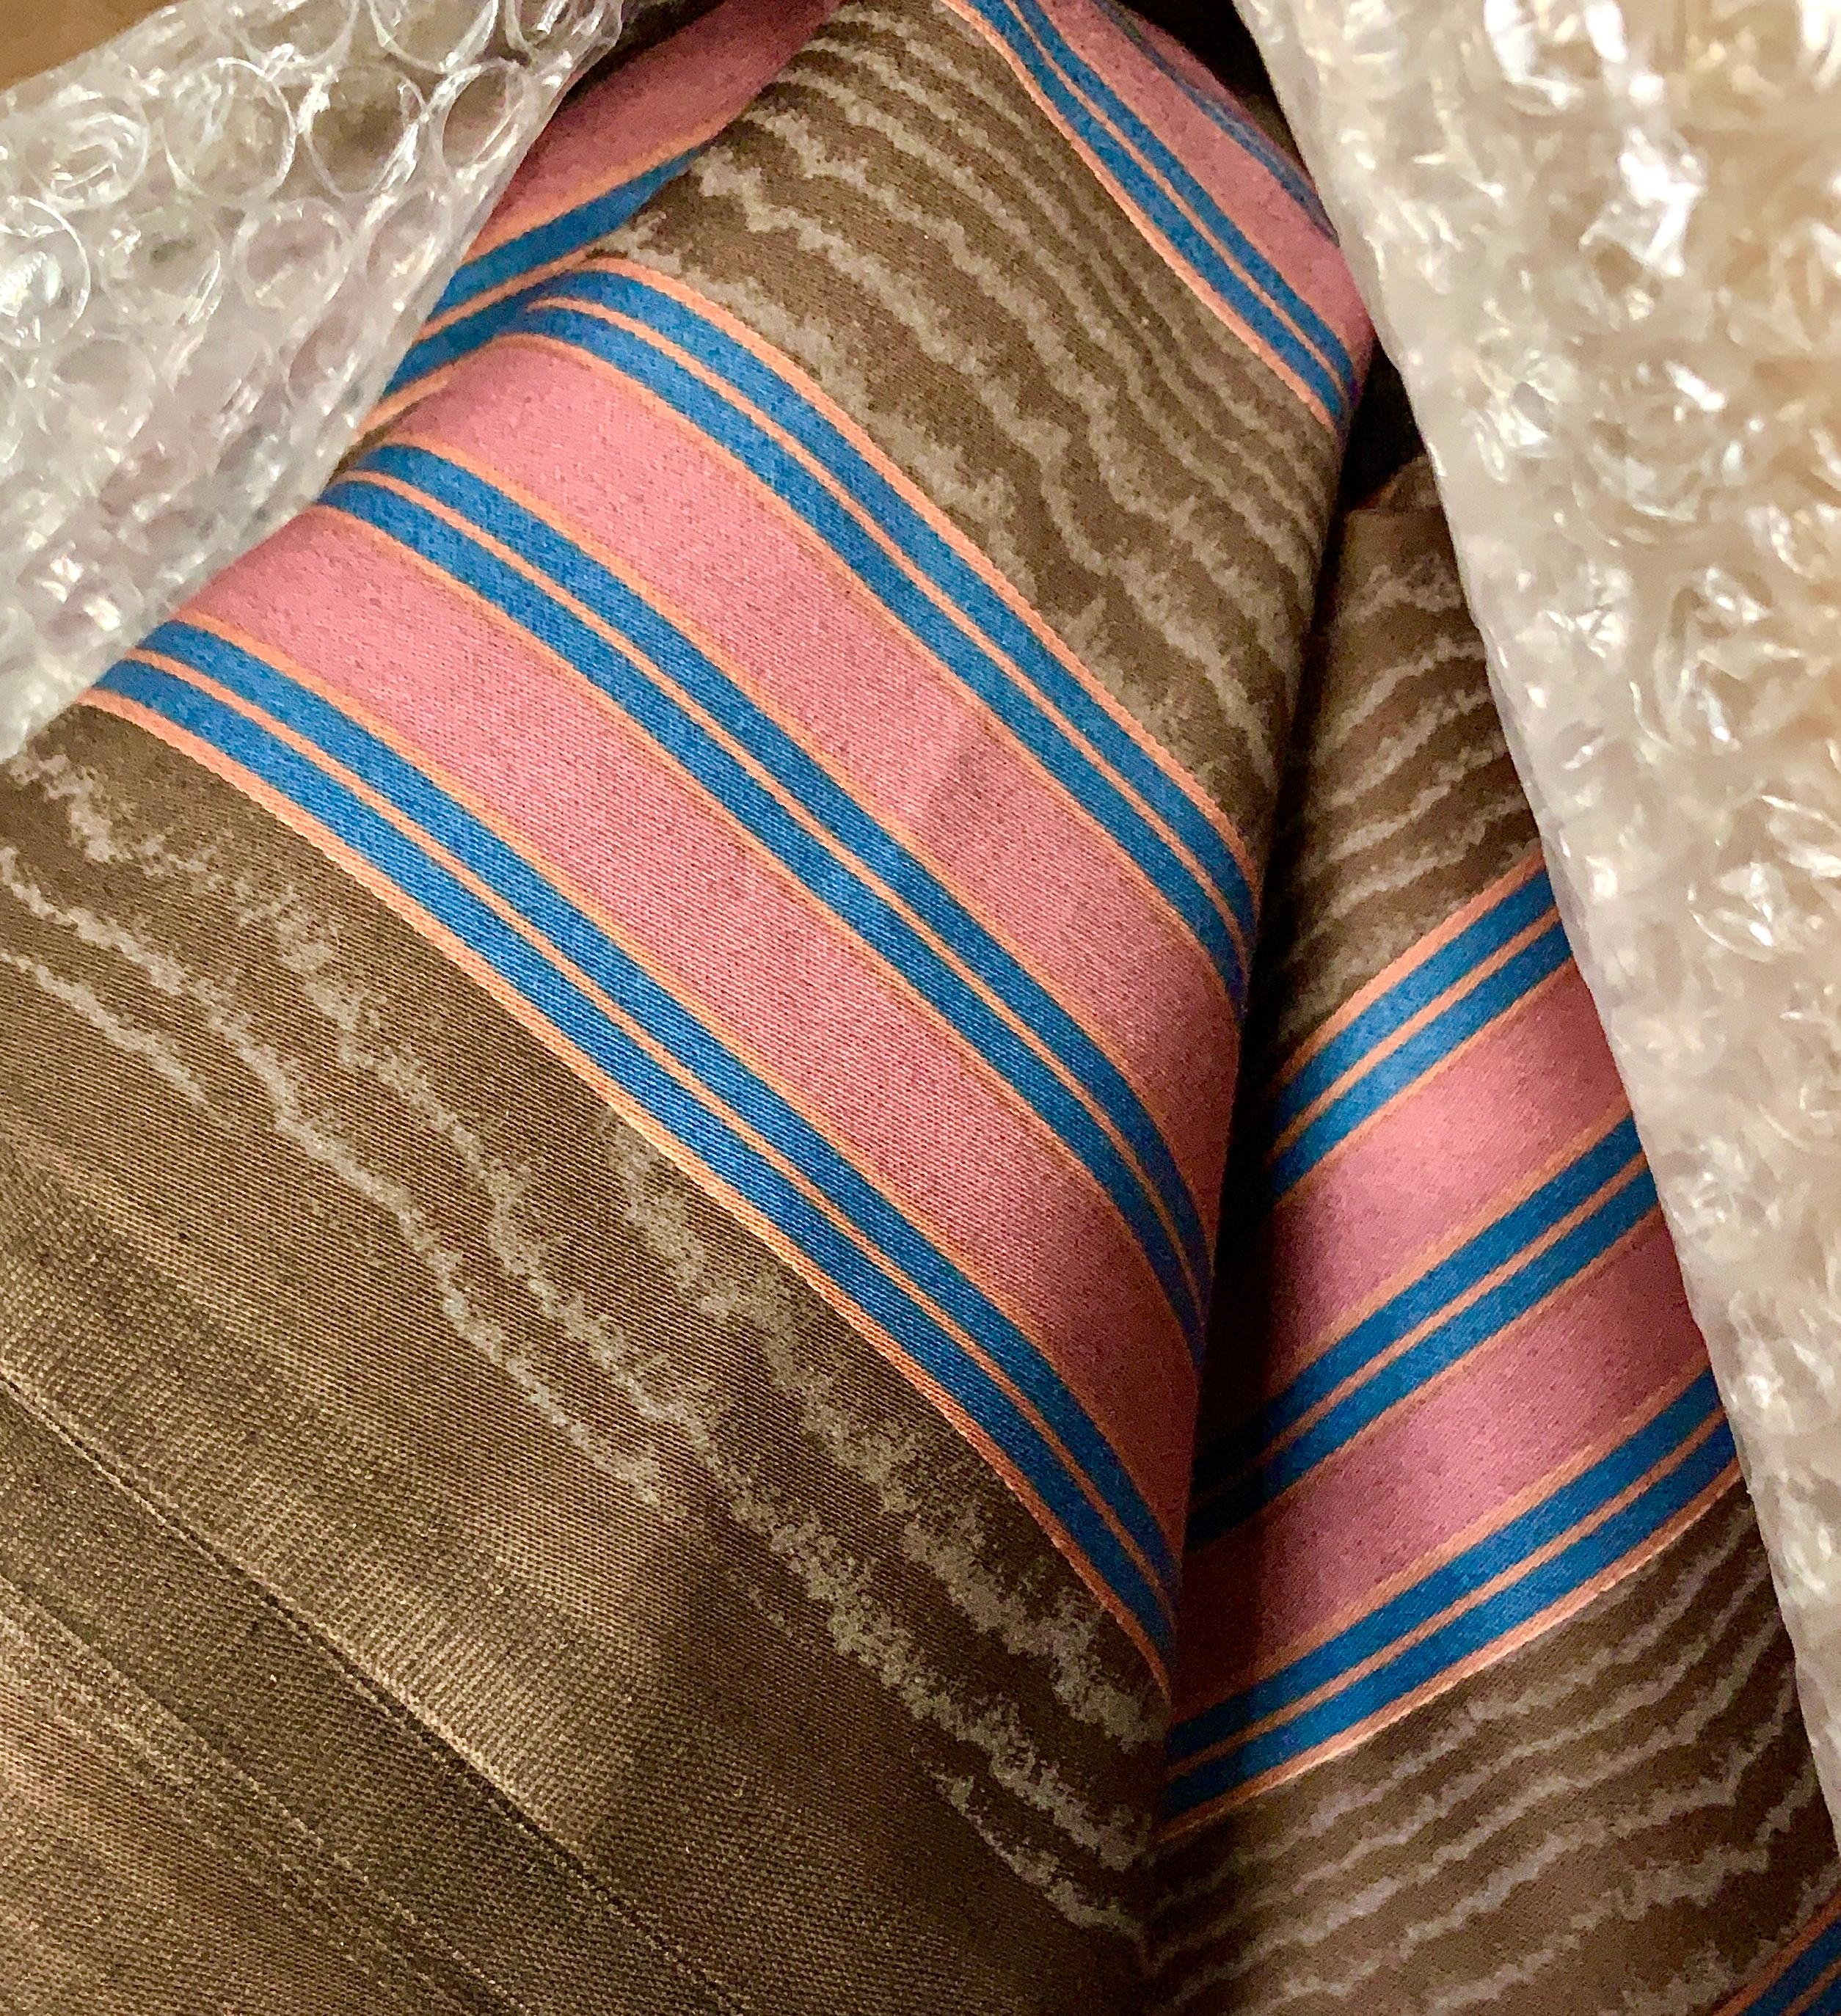 Boussac pink, blue, brown striped Woodgrain “Kim’ Textile, France, 1982. Purchased for over 75 dollars per yard in 1982 (which is 200+ USD per yard in 2020).  Appears to be a luscious silk blend. Gorgeous silky drape, yet substantial in weight. 